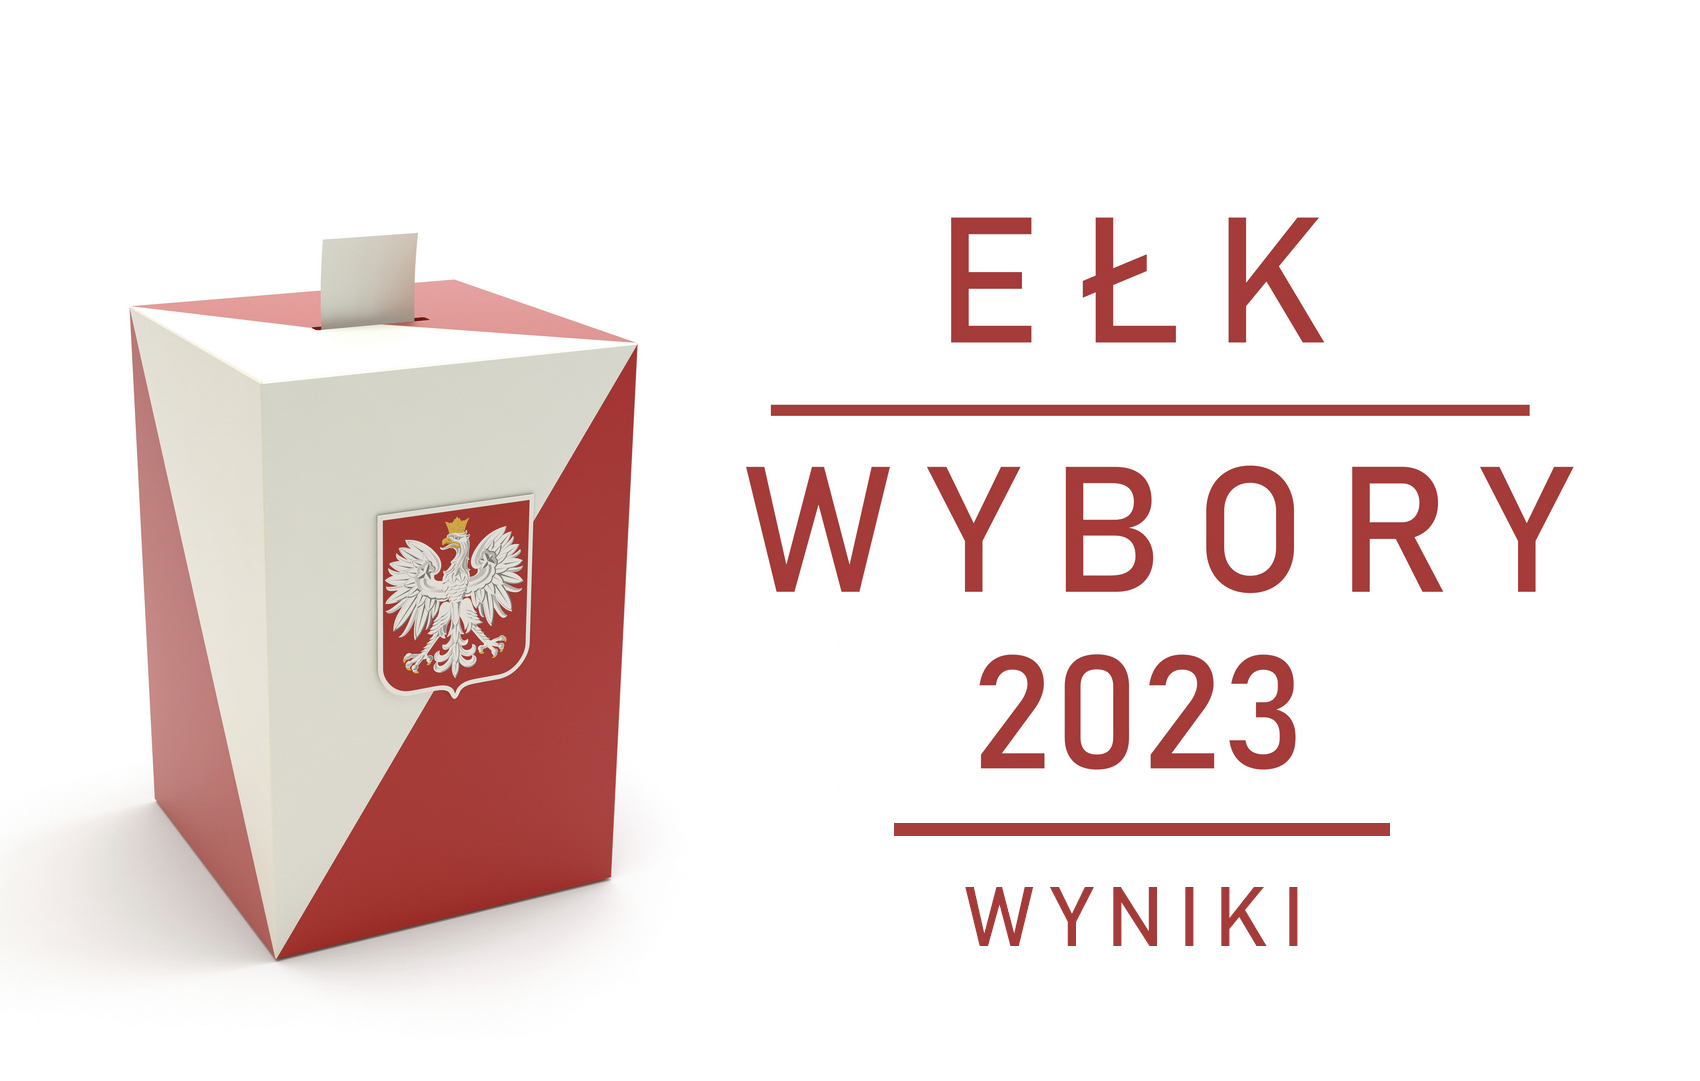 We know the results of the elections in Ełk